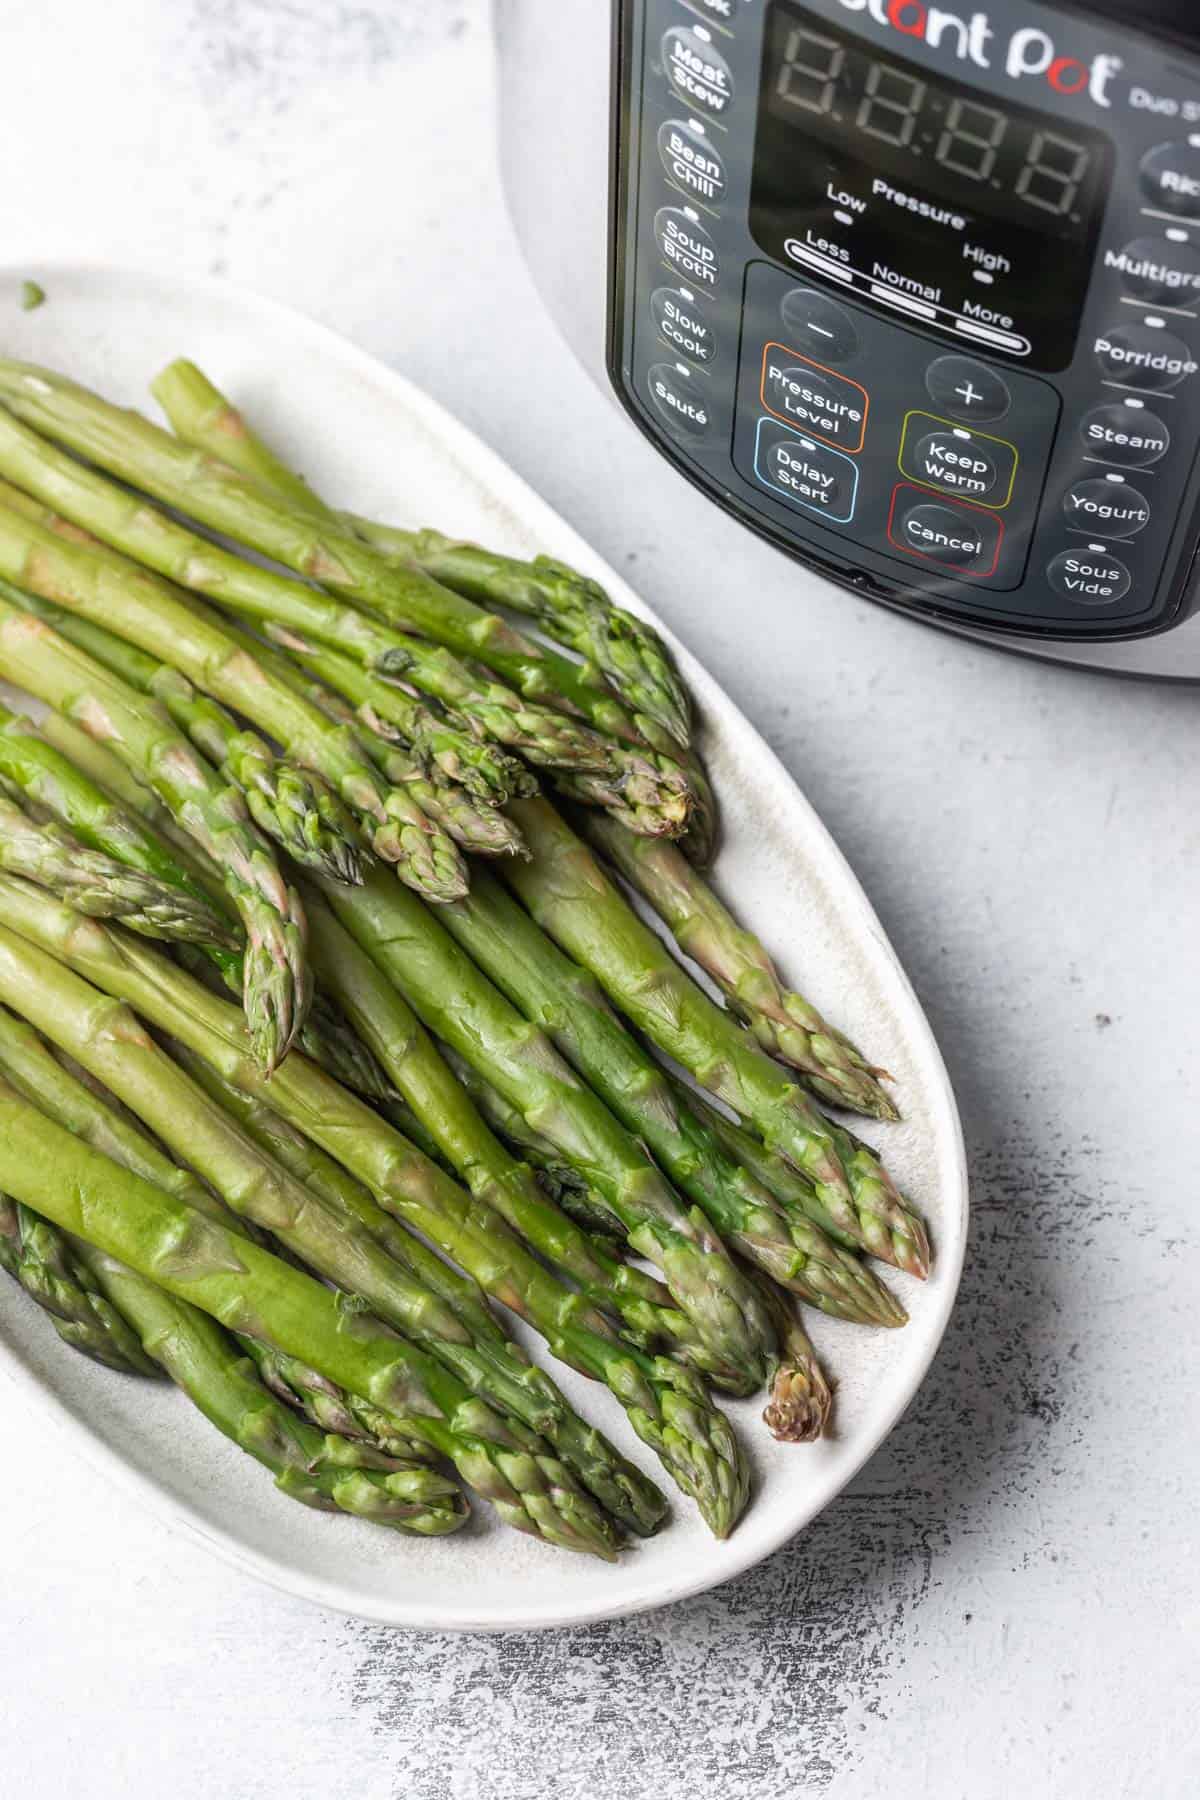 Cooked asparagus on a serving platter in front of an instant pot.